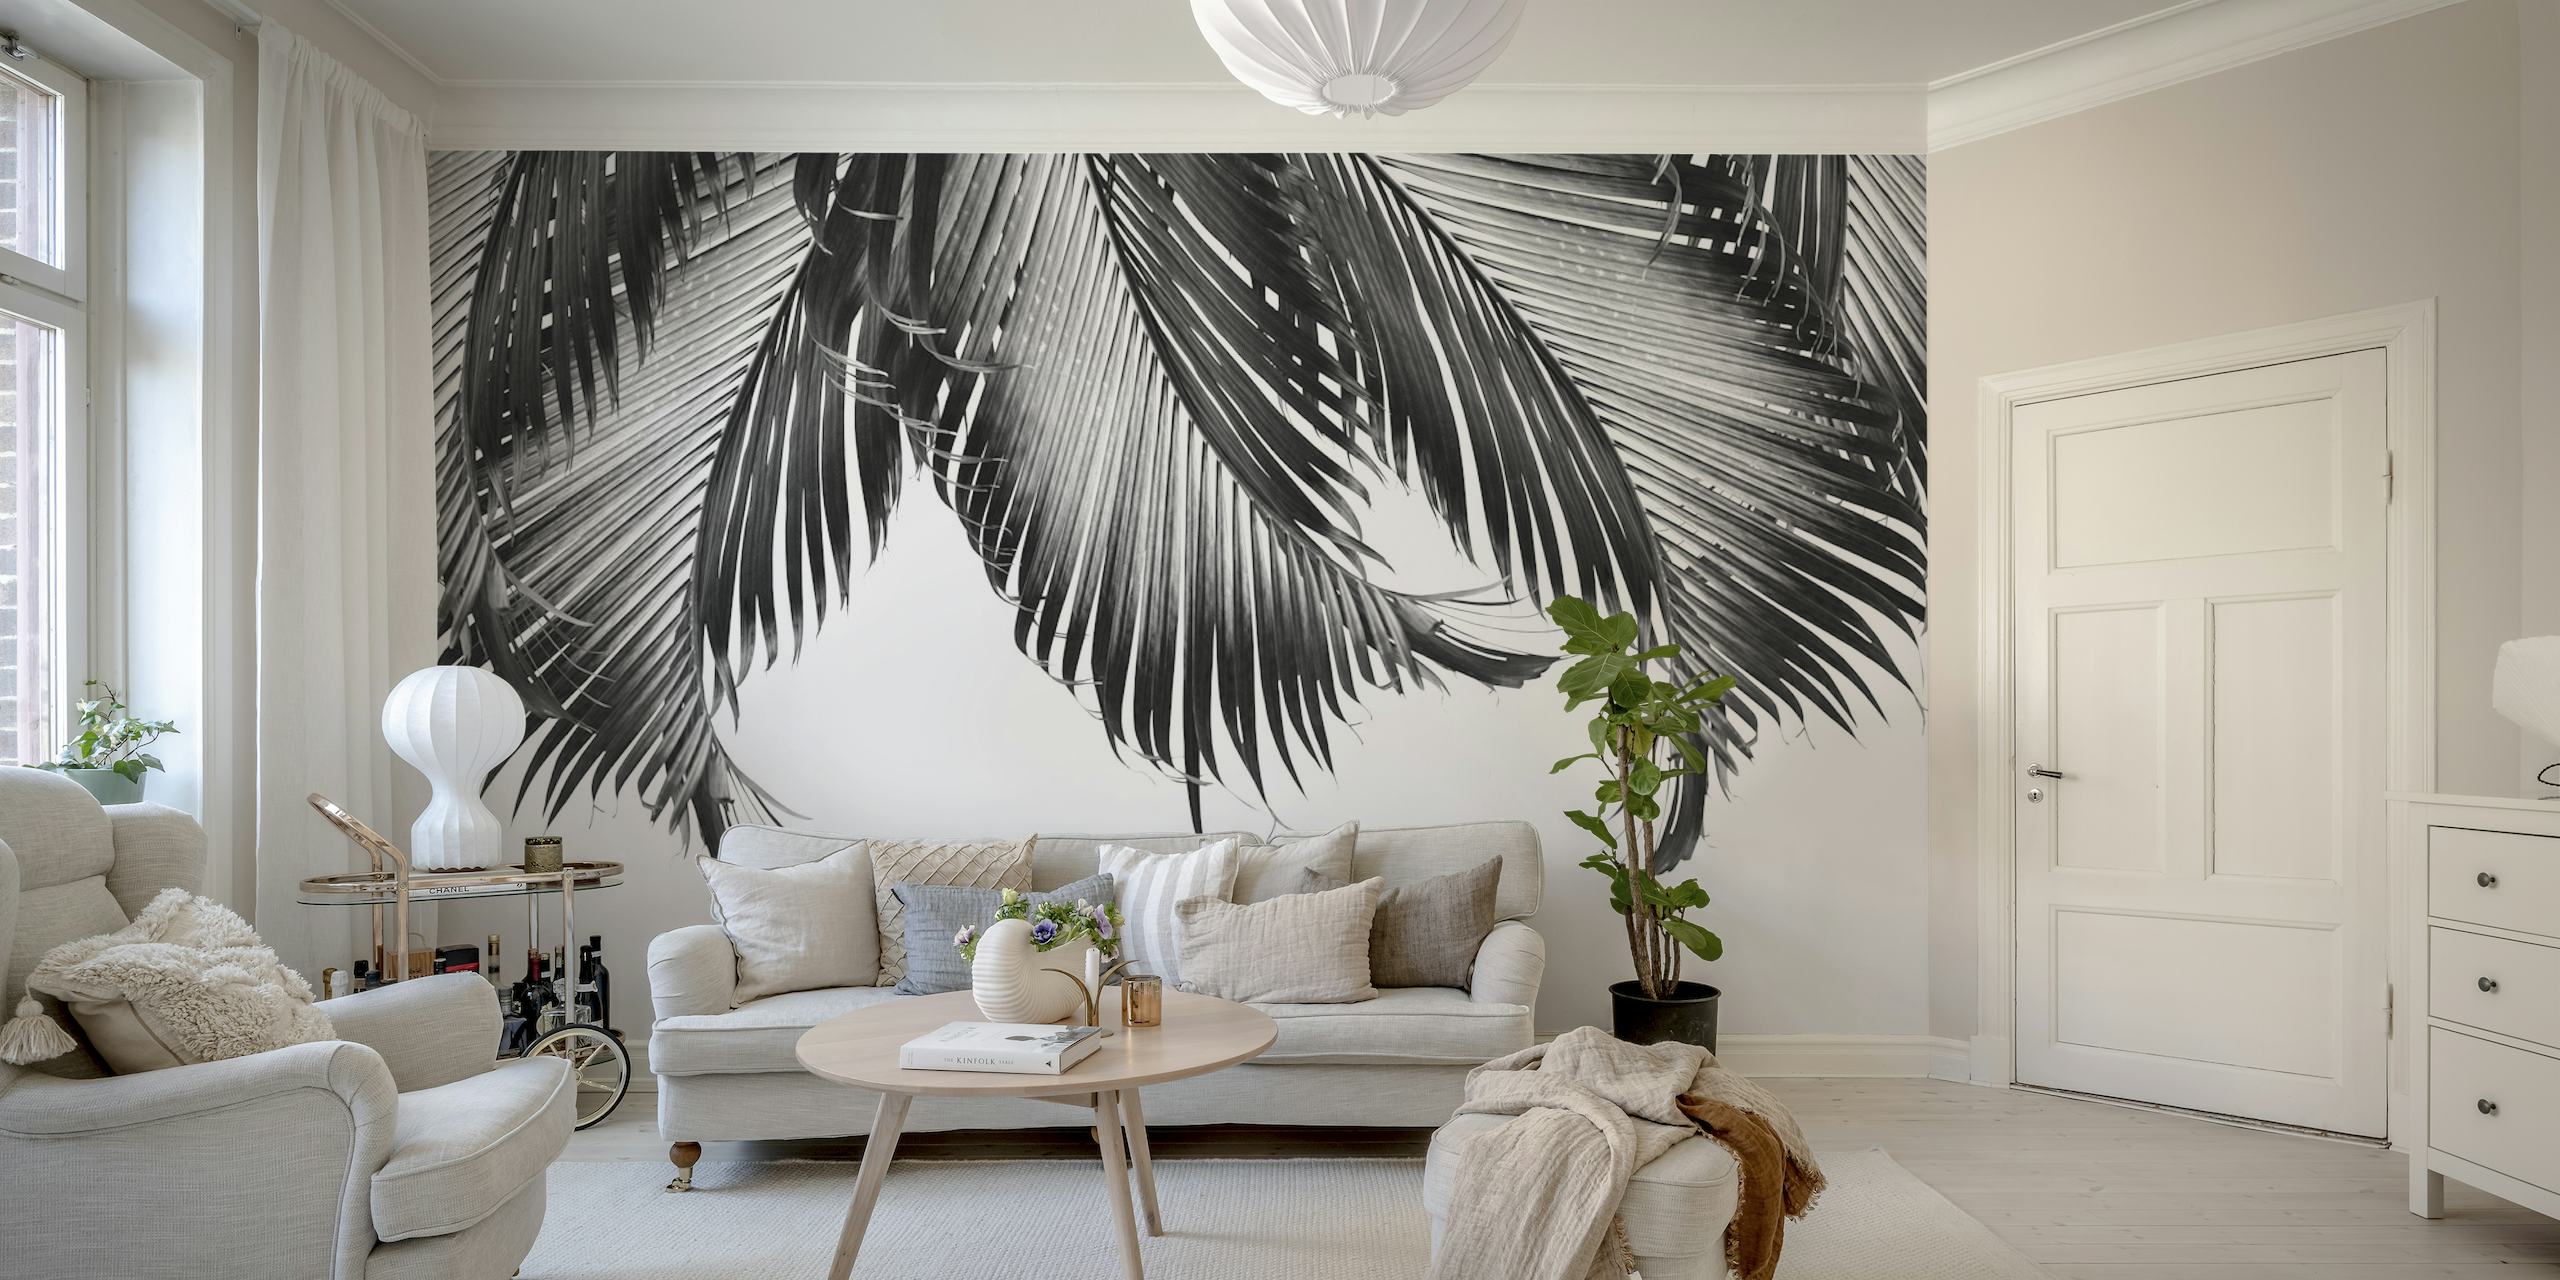 Black and white palm leaf design wall mural for modern interior decor